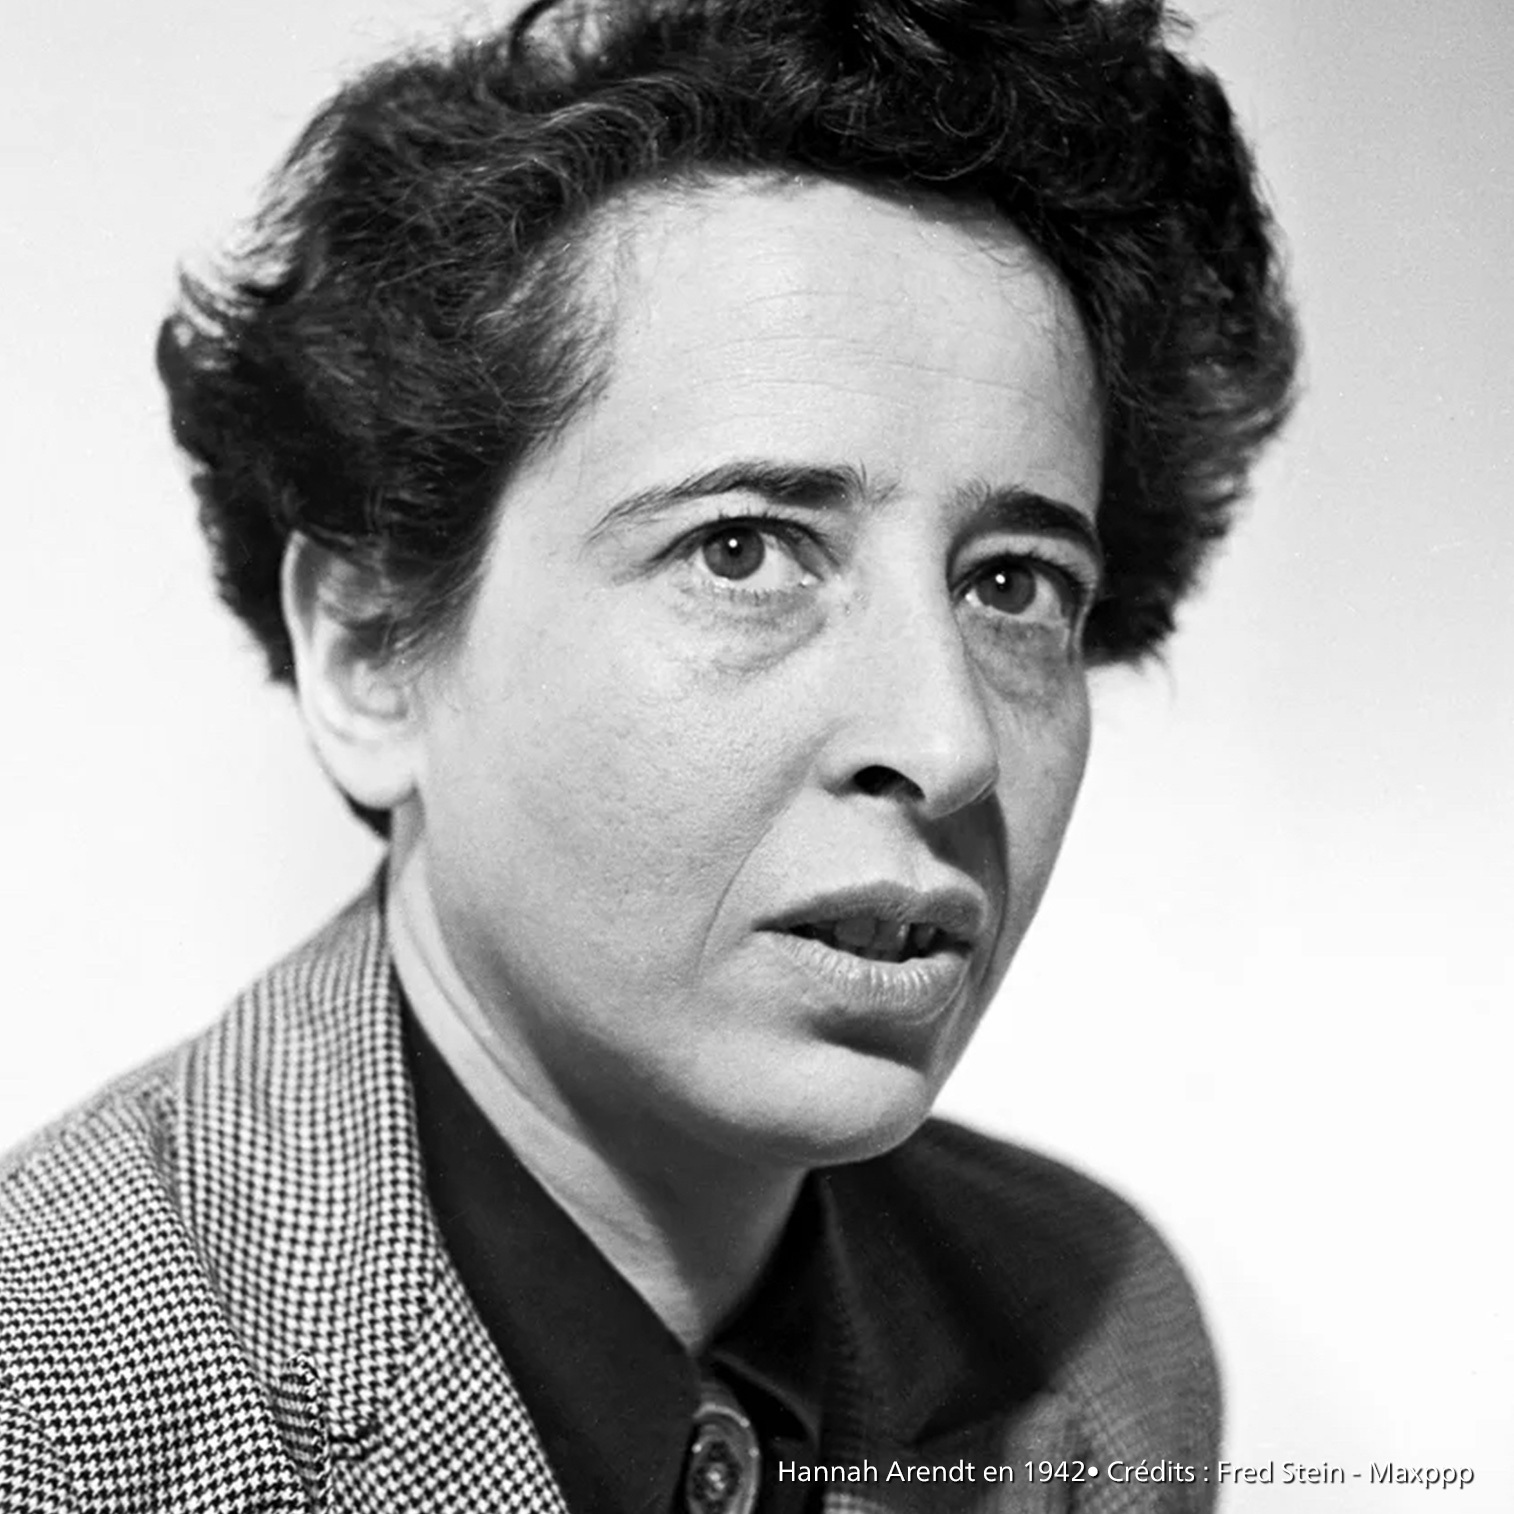 Episode 4, Arendt, Jonas and the ethics of technology